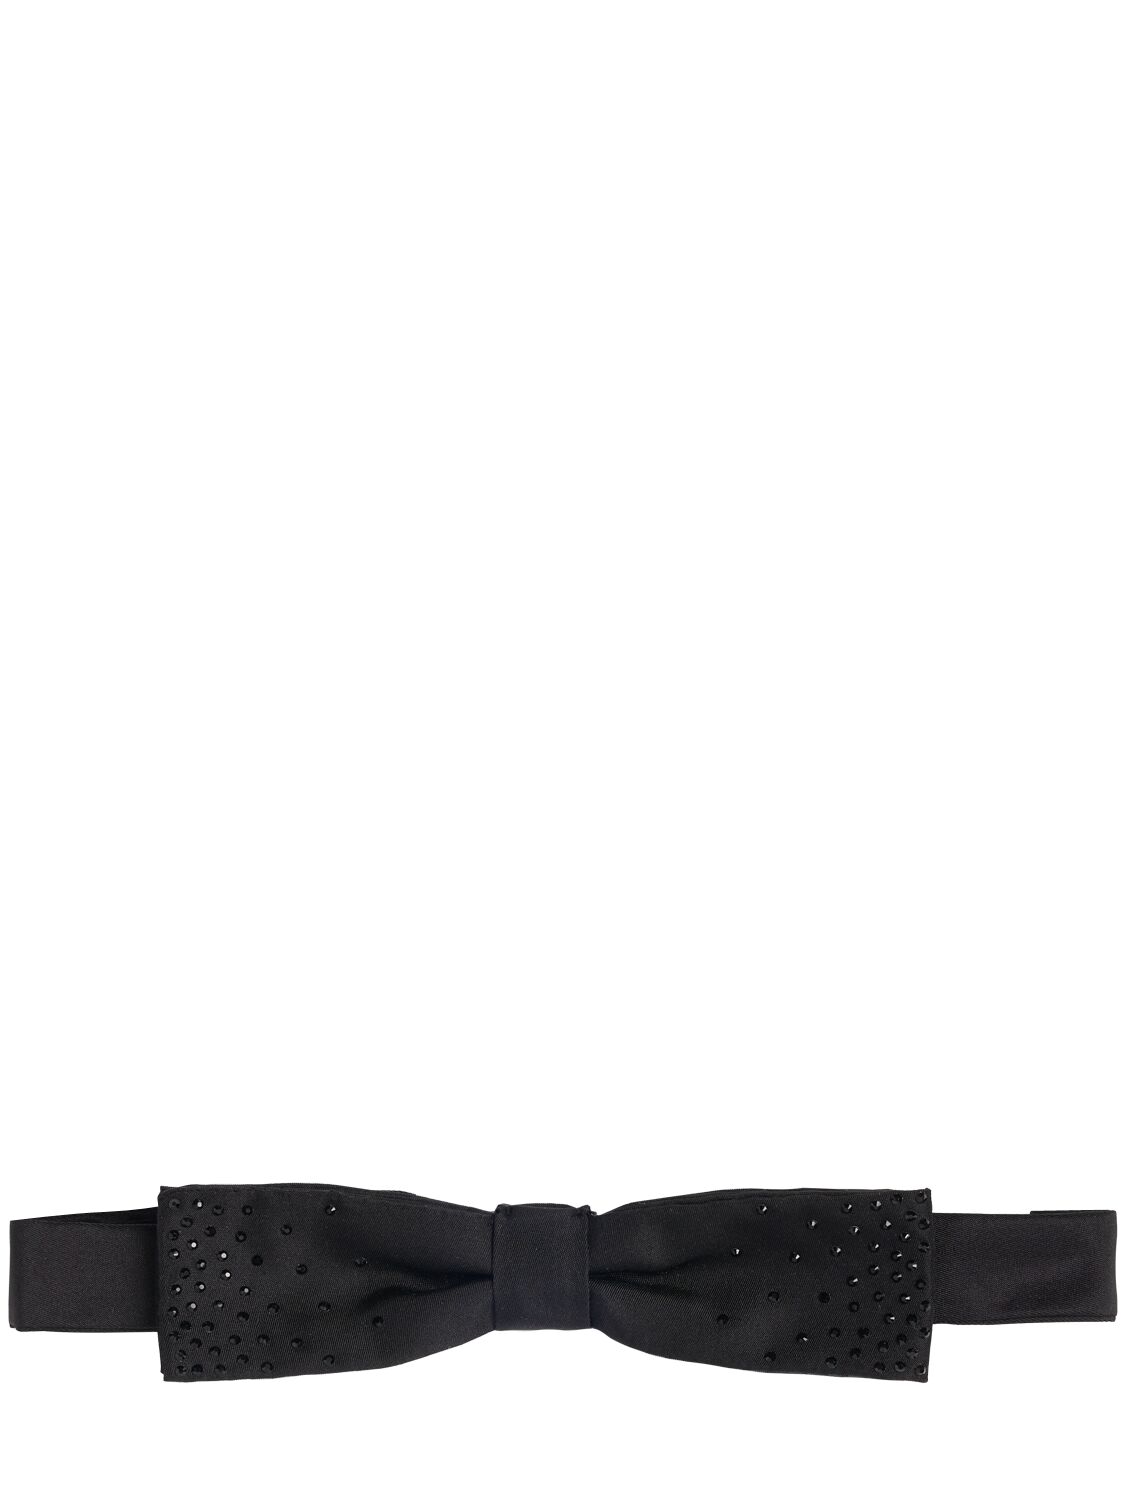 Dsquared2 Bow Tie W/ Crystals In Black